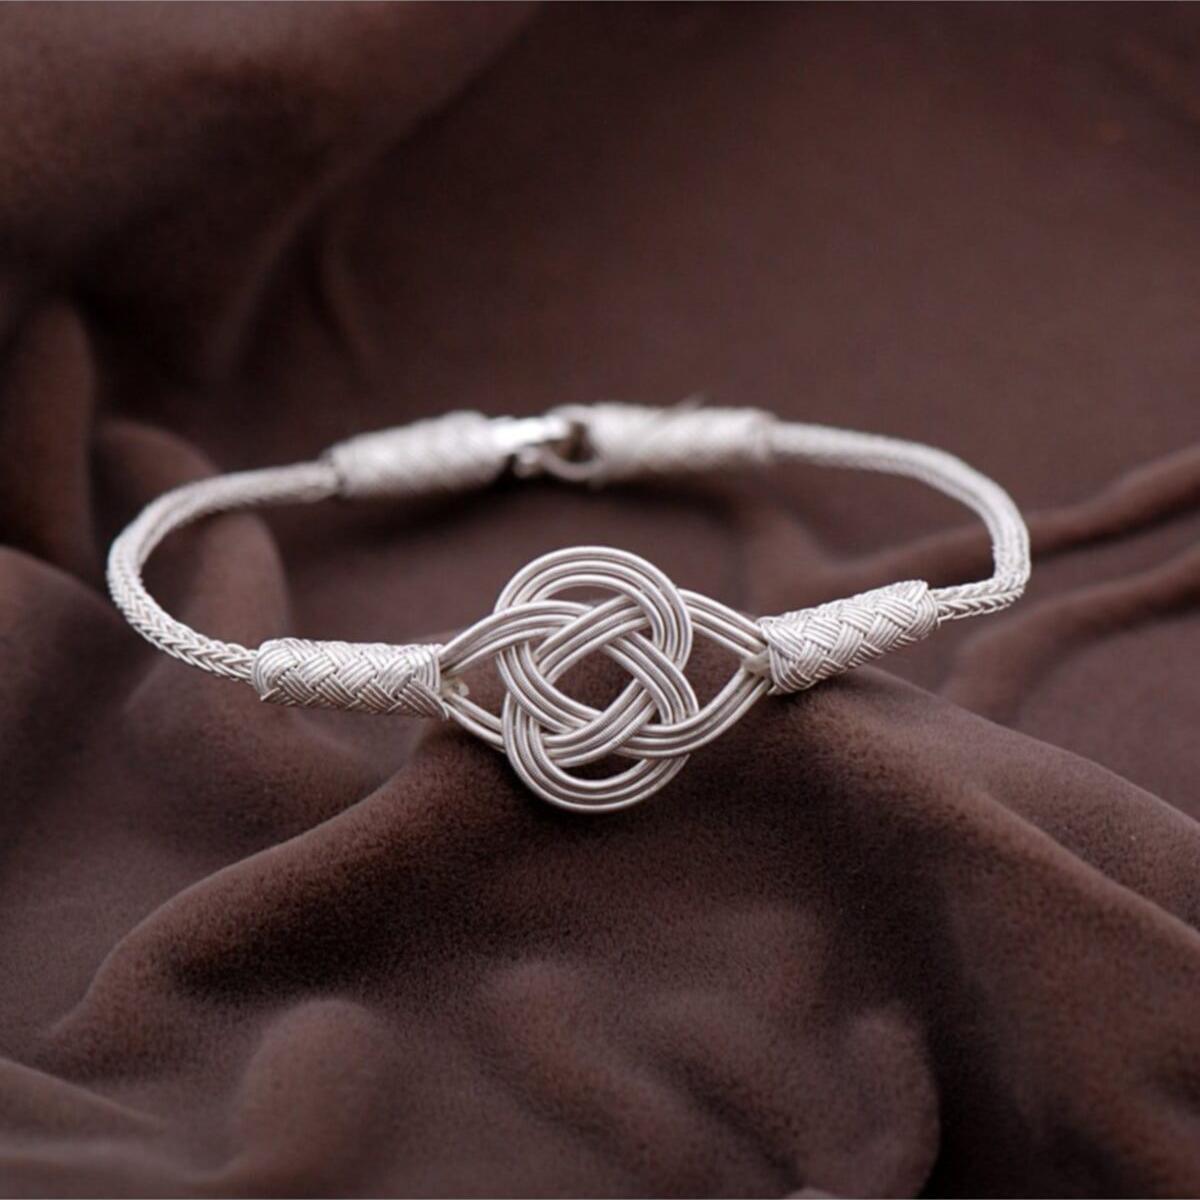 Handmade Love Knot Silver Bracelet • Bridesmaid Gift For Wedding Day - Trending Silver Gifts